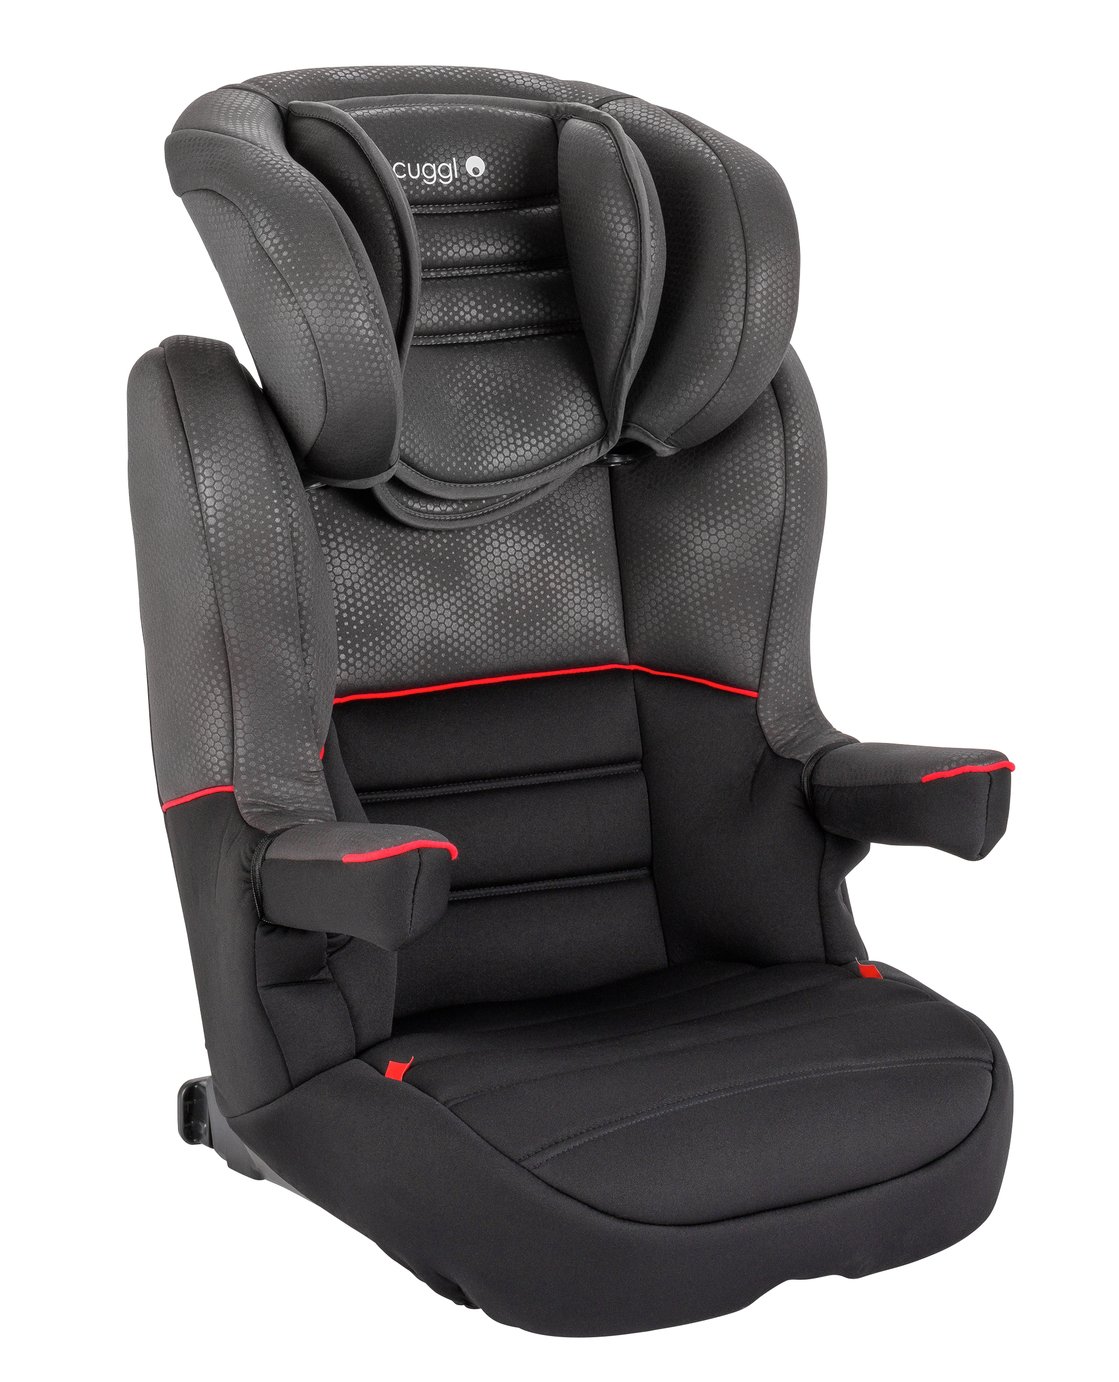 Cuggl Bunting Group 2/3 Side Protection Car Seat Review